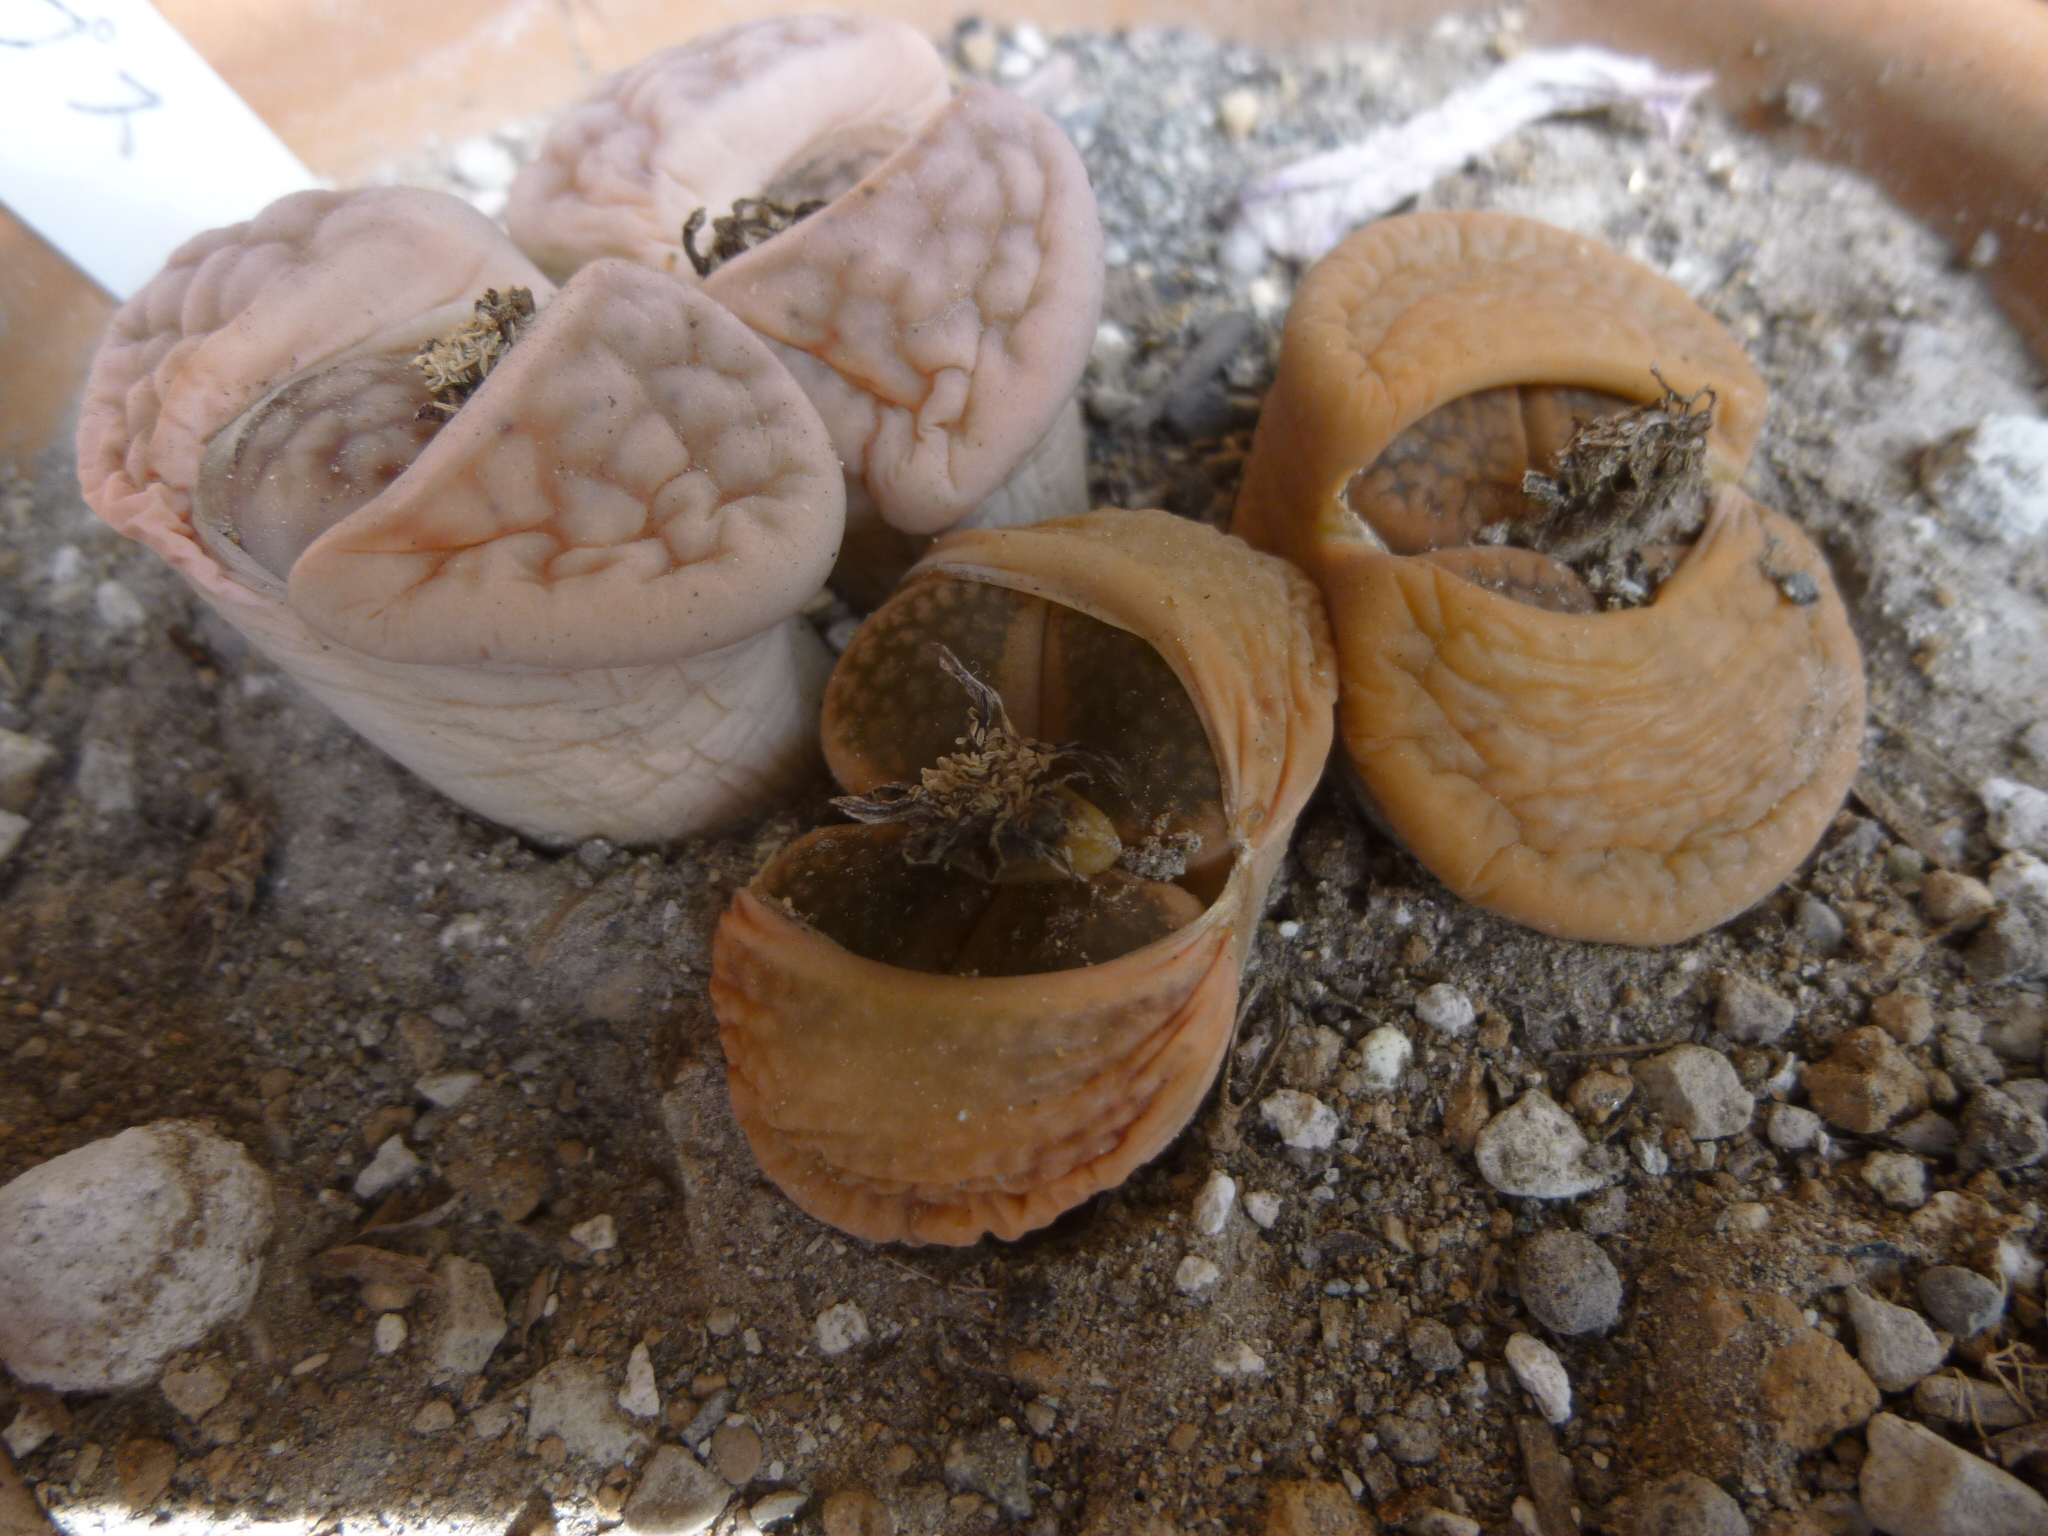 http://hungtime-times.com/hung_time_writers/entry_img/lithops1405%20%281%29.JPG